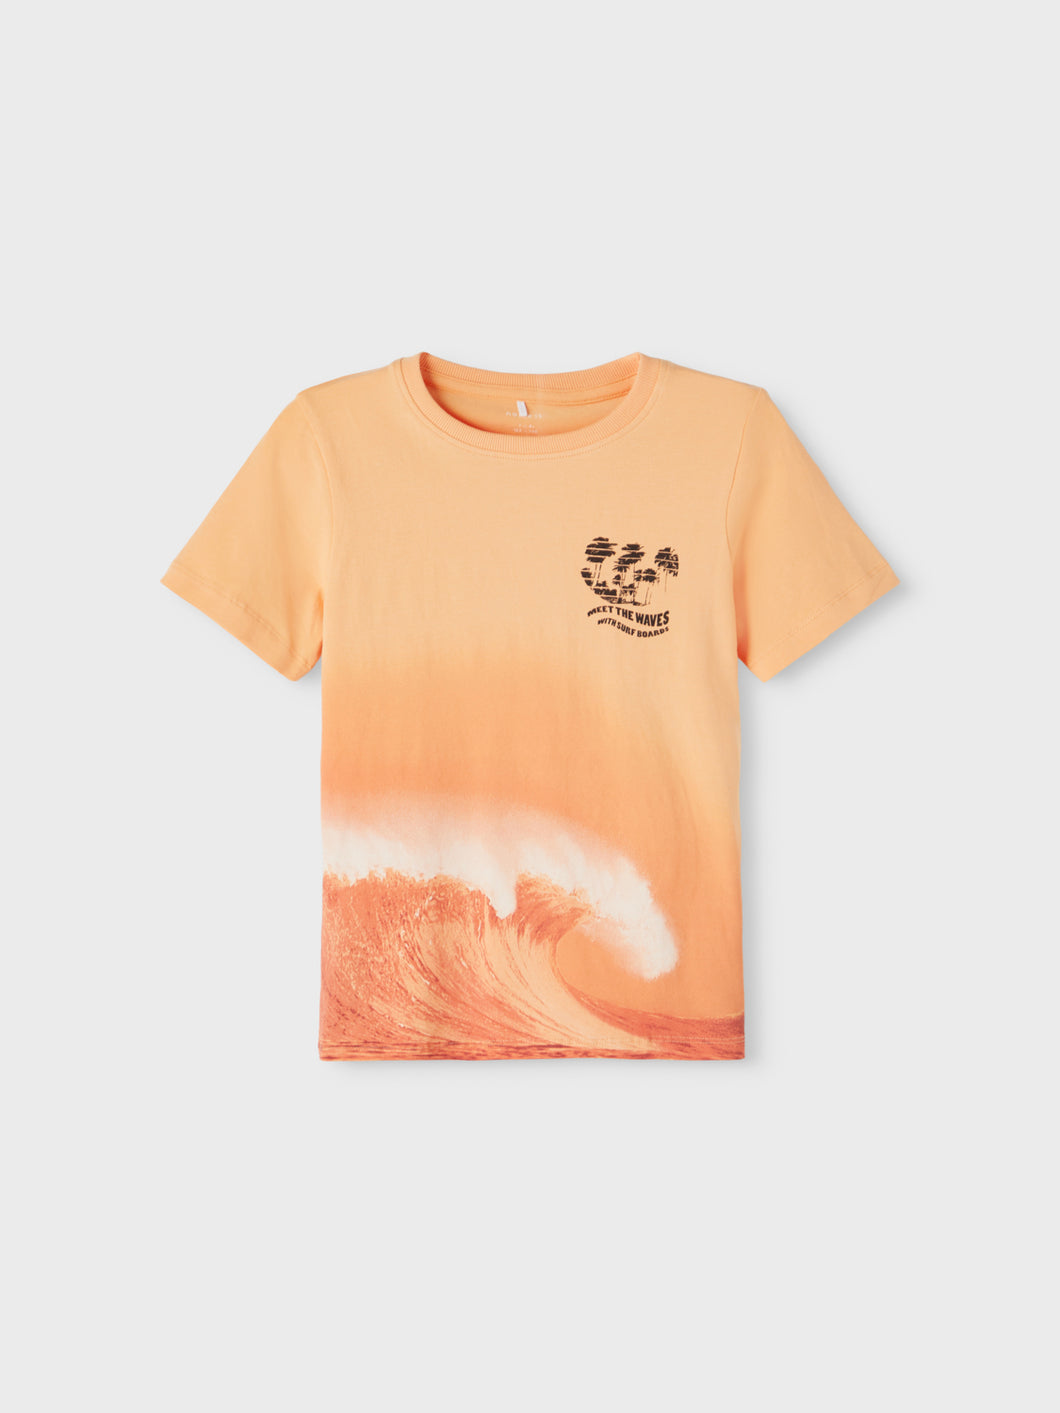 NKMJOFREDE T-shirts & Tops - Salmon Buff